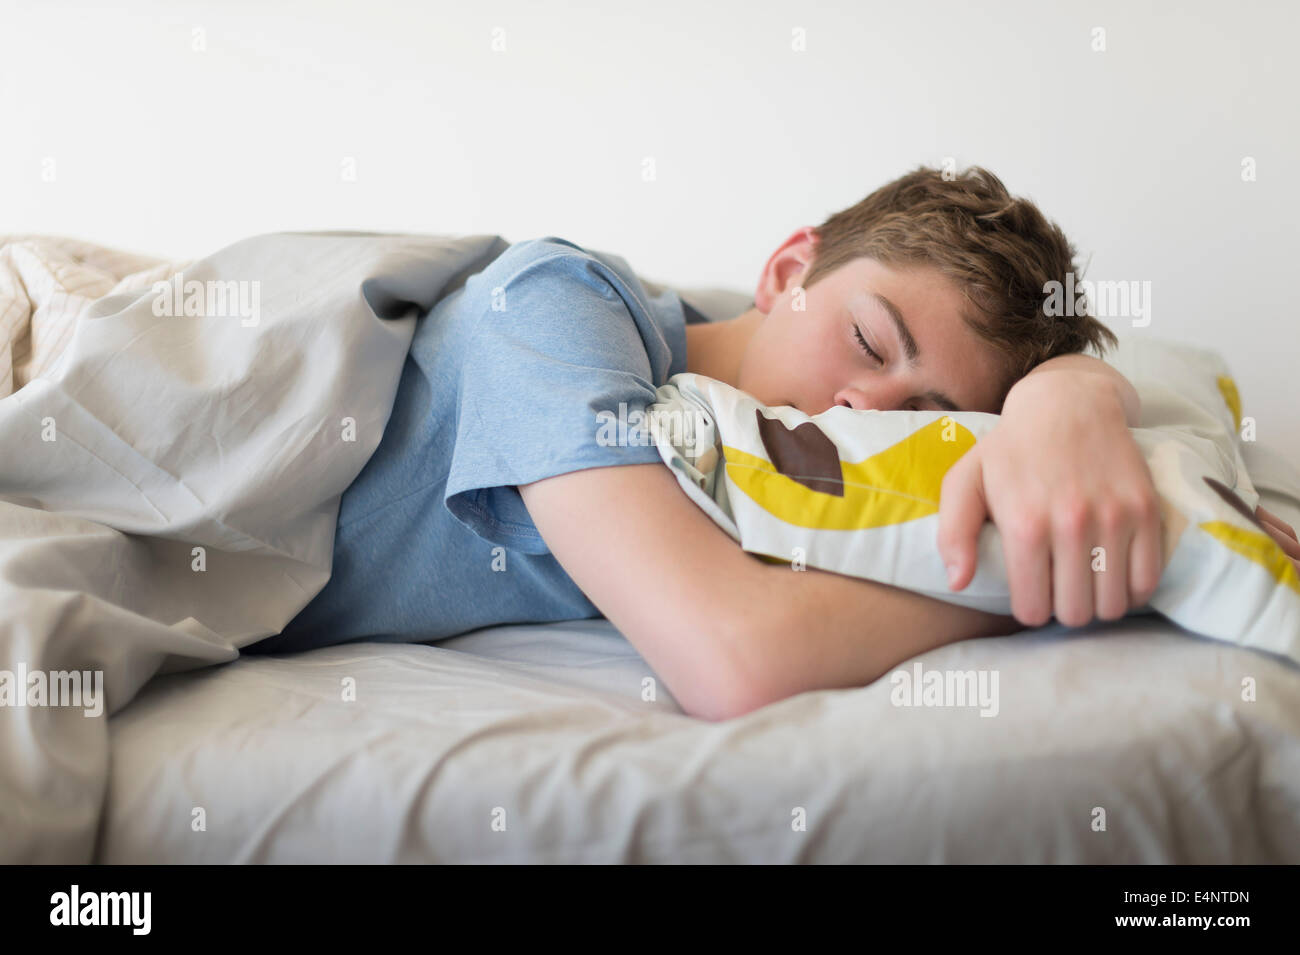 Teenage boy (16-17) sleeping in bed Banque D'Images